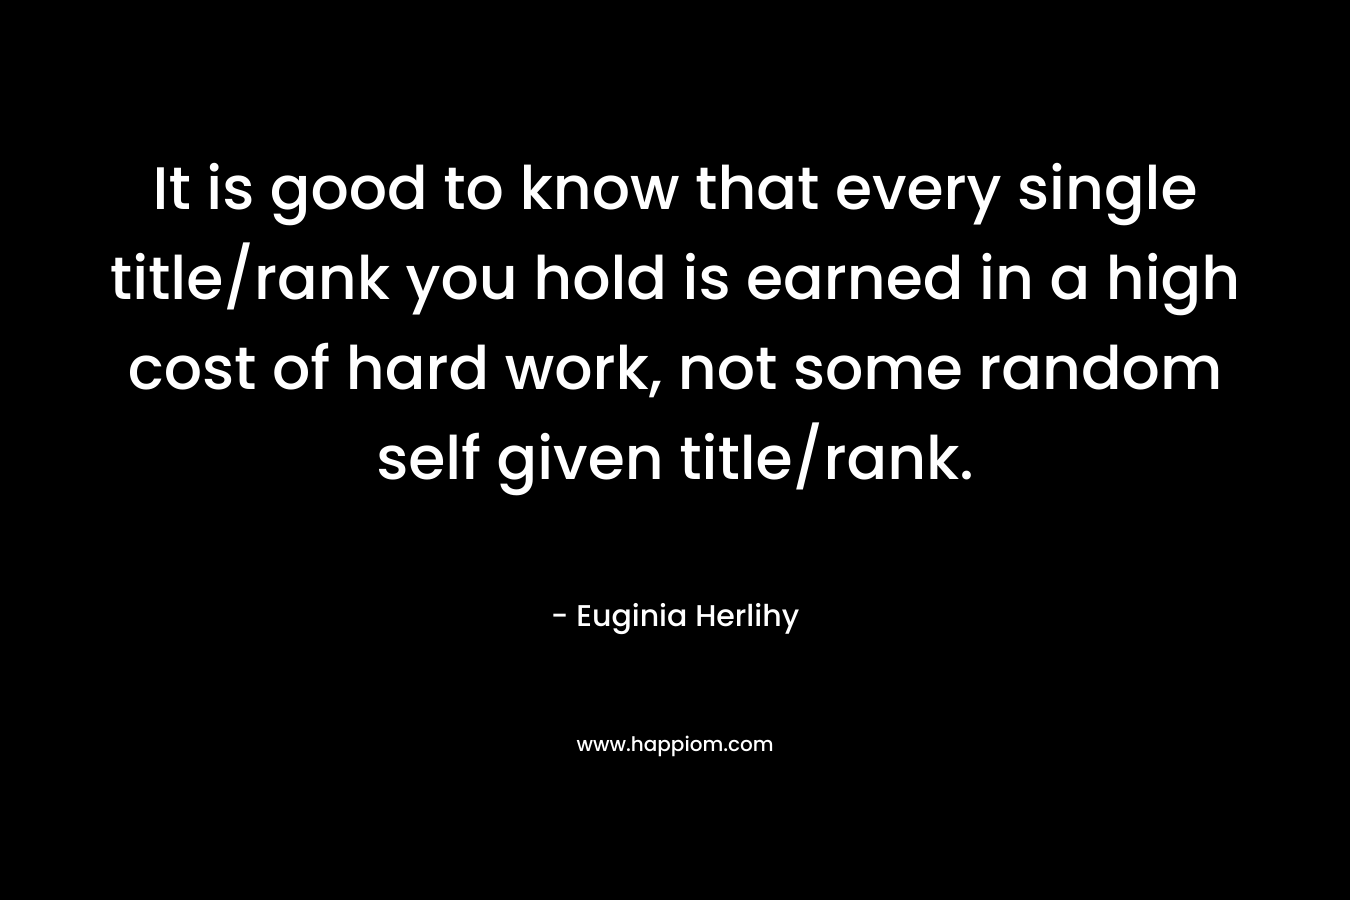 It is good to know that every single title/rank you hold is earned in a high cost of hard work, not some random self given title/rank.